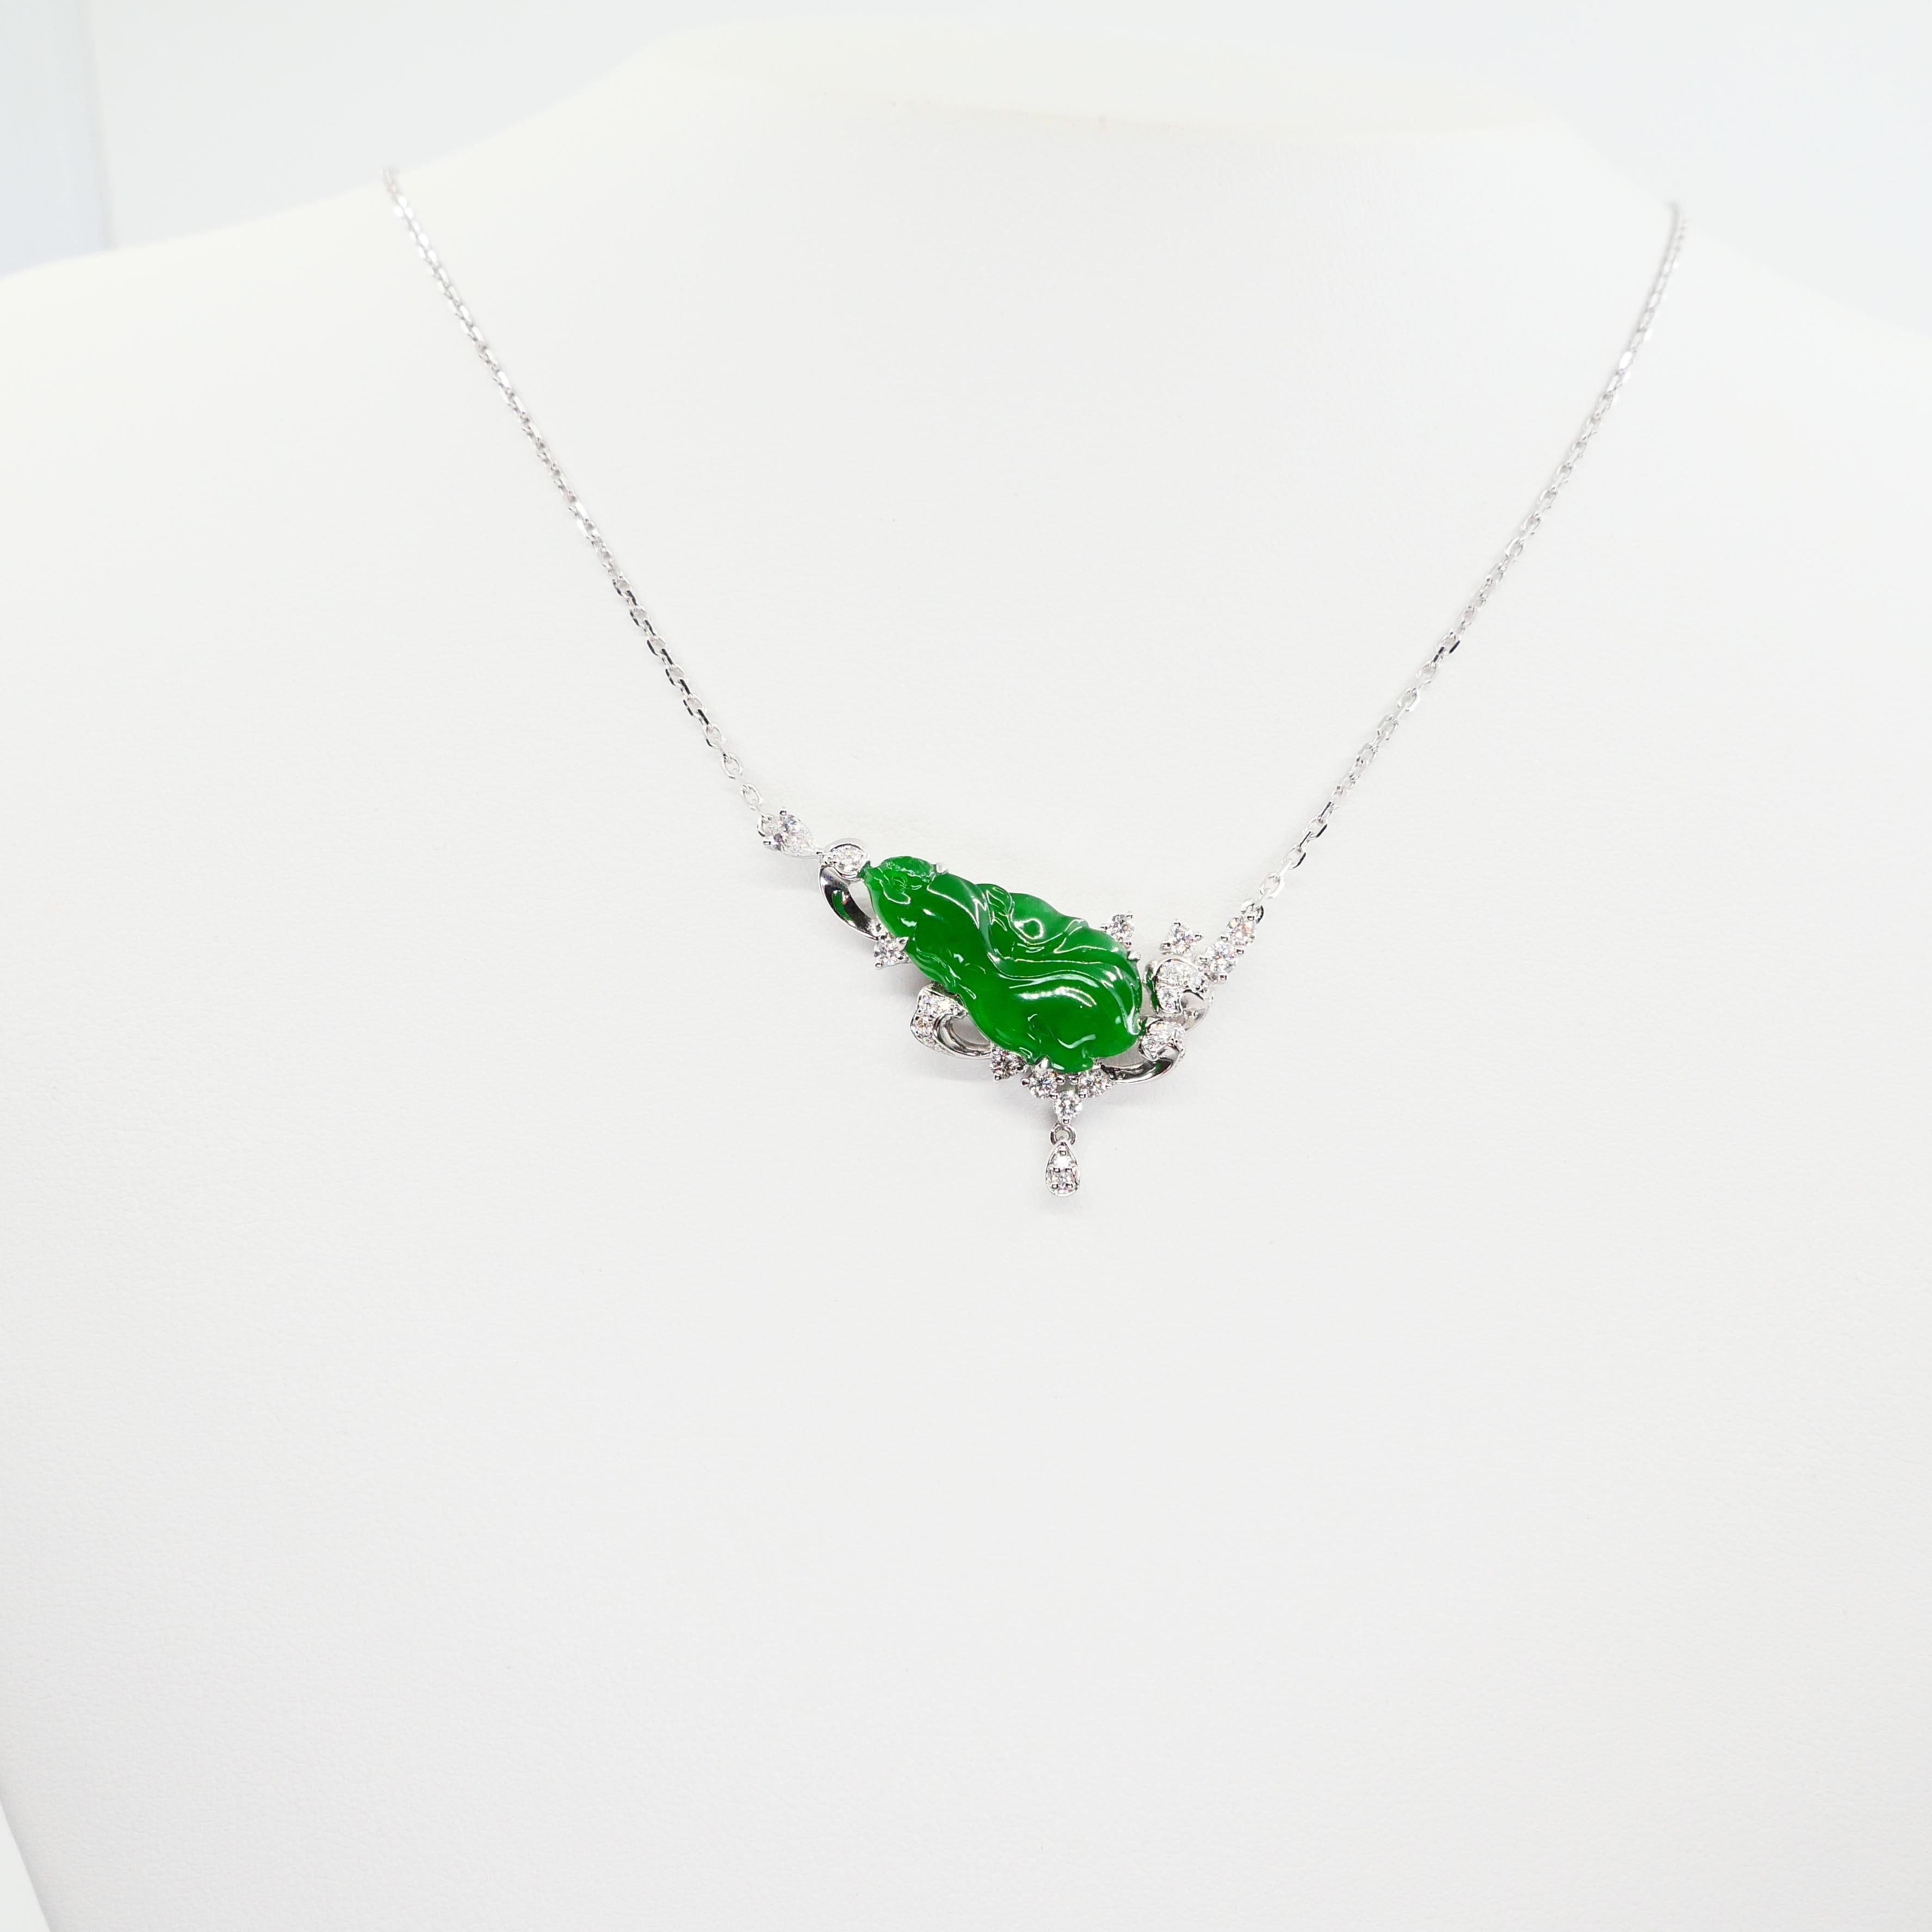 Certified Type A Jadeite Jade Diamond Pendant Drop Necklace, Imperial Green In New Condition For Sale In Hong Kong, HK